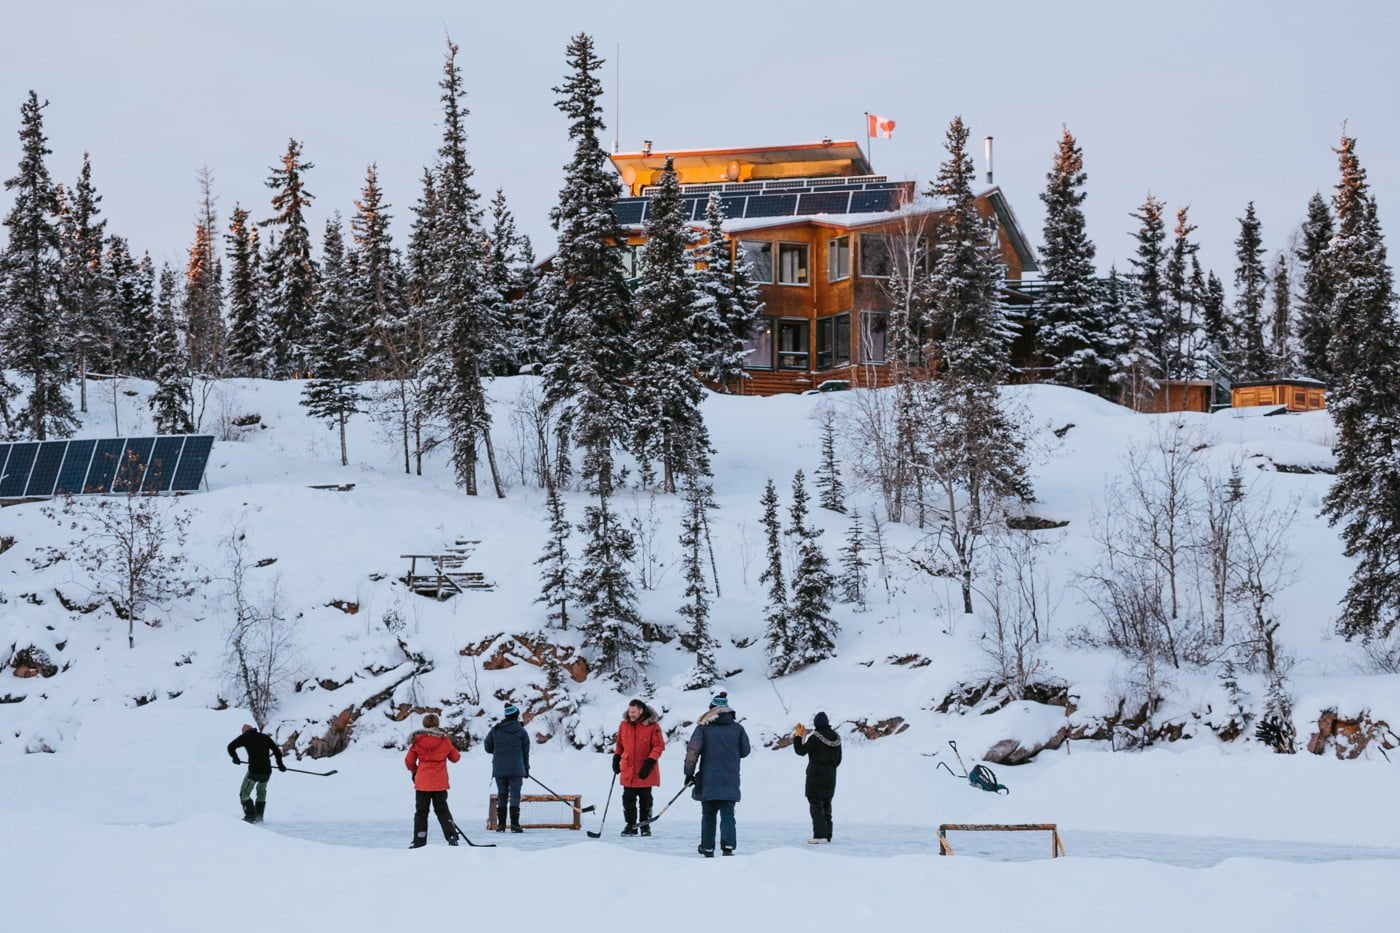 6 Lodges In Canada That Look Like They Belong In A Christmas Movie - Narcity